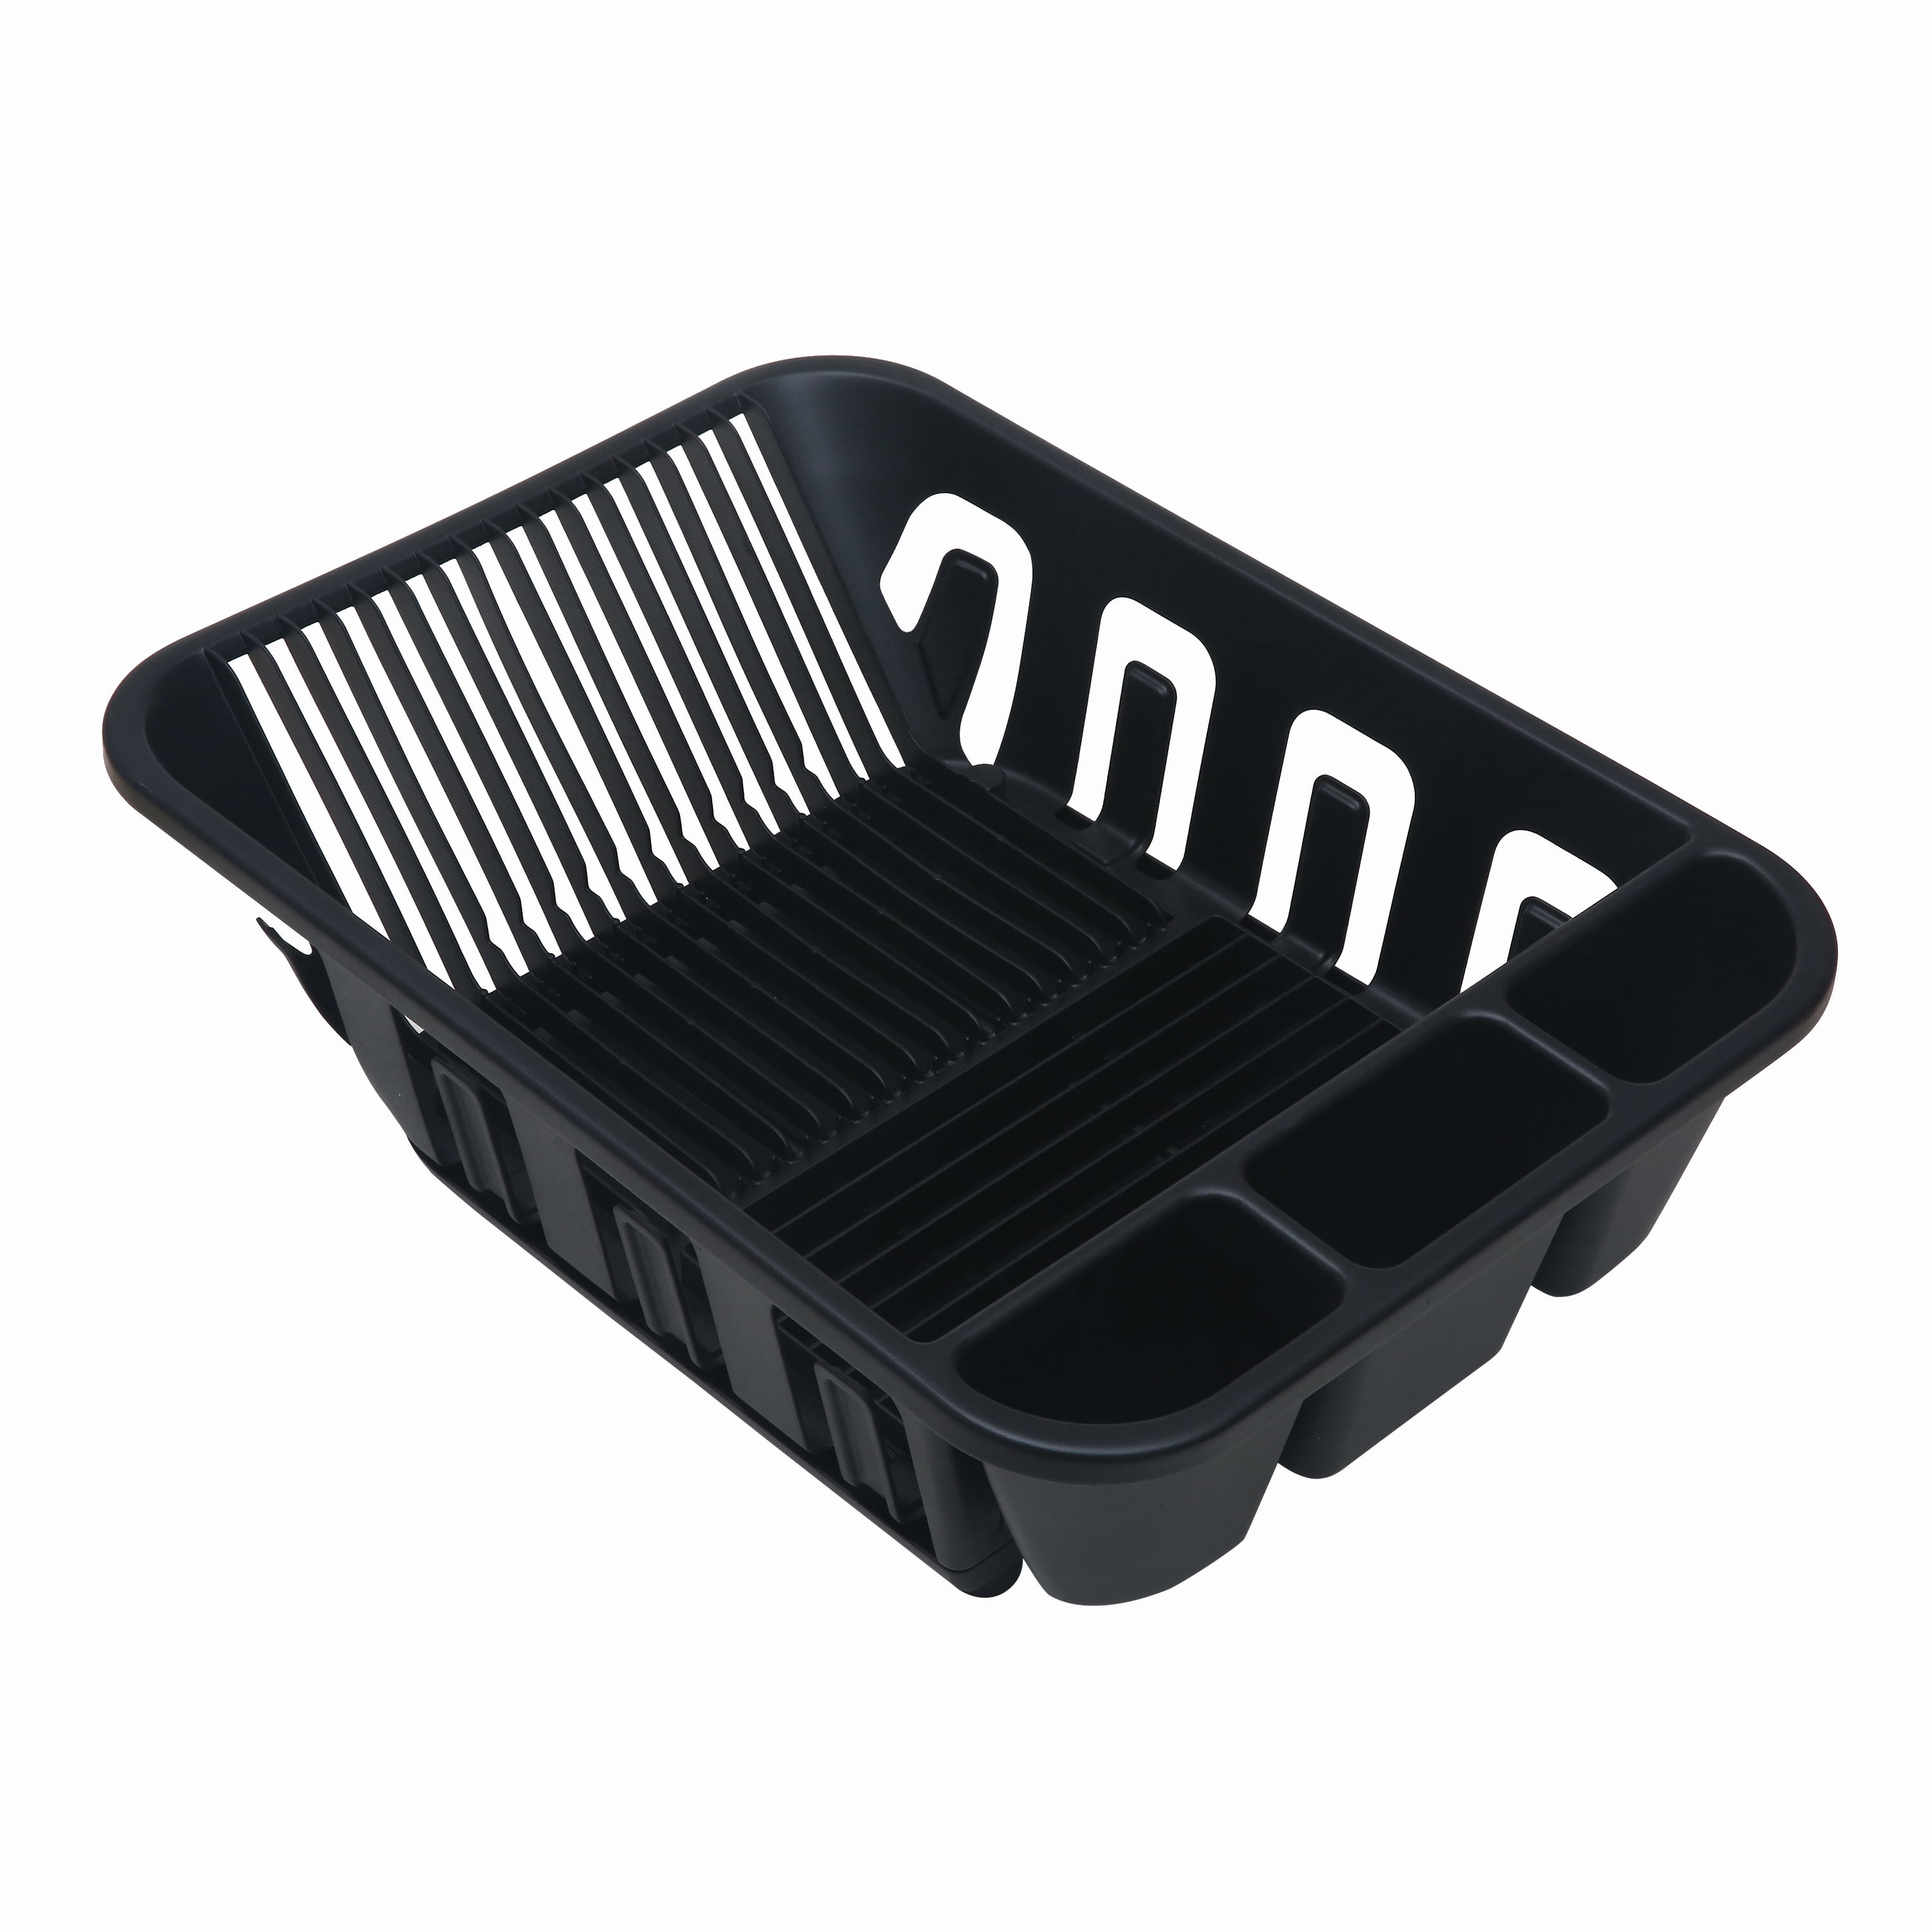 Mainstays 2 Piece Plastic Kitchen Sink Set, Dish Rack with Slide-out Drip Tray, Black